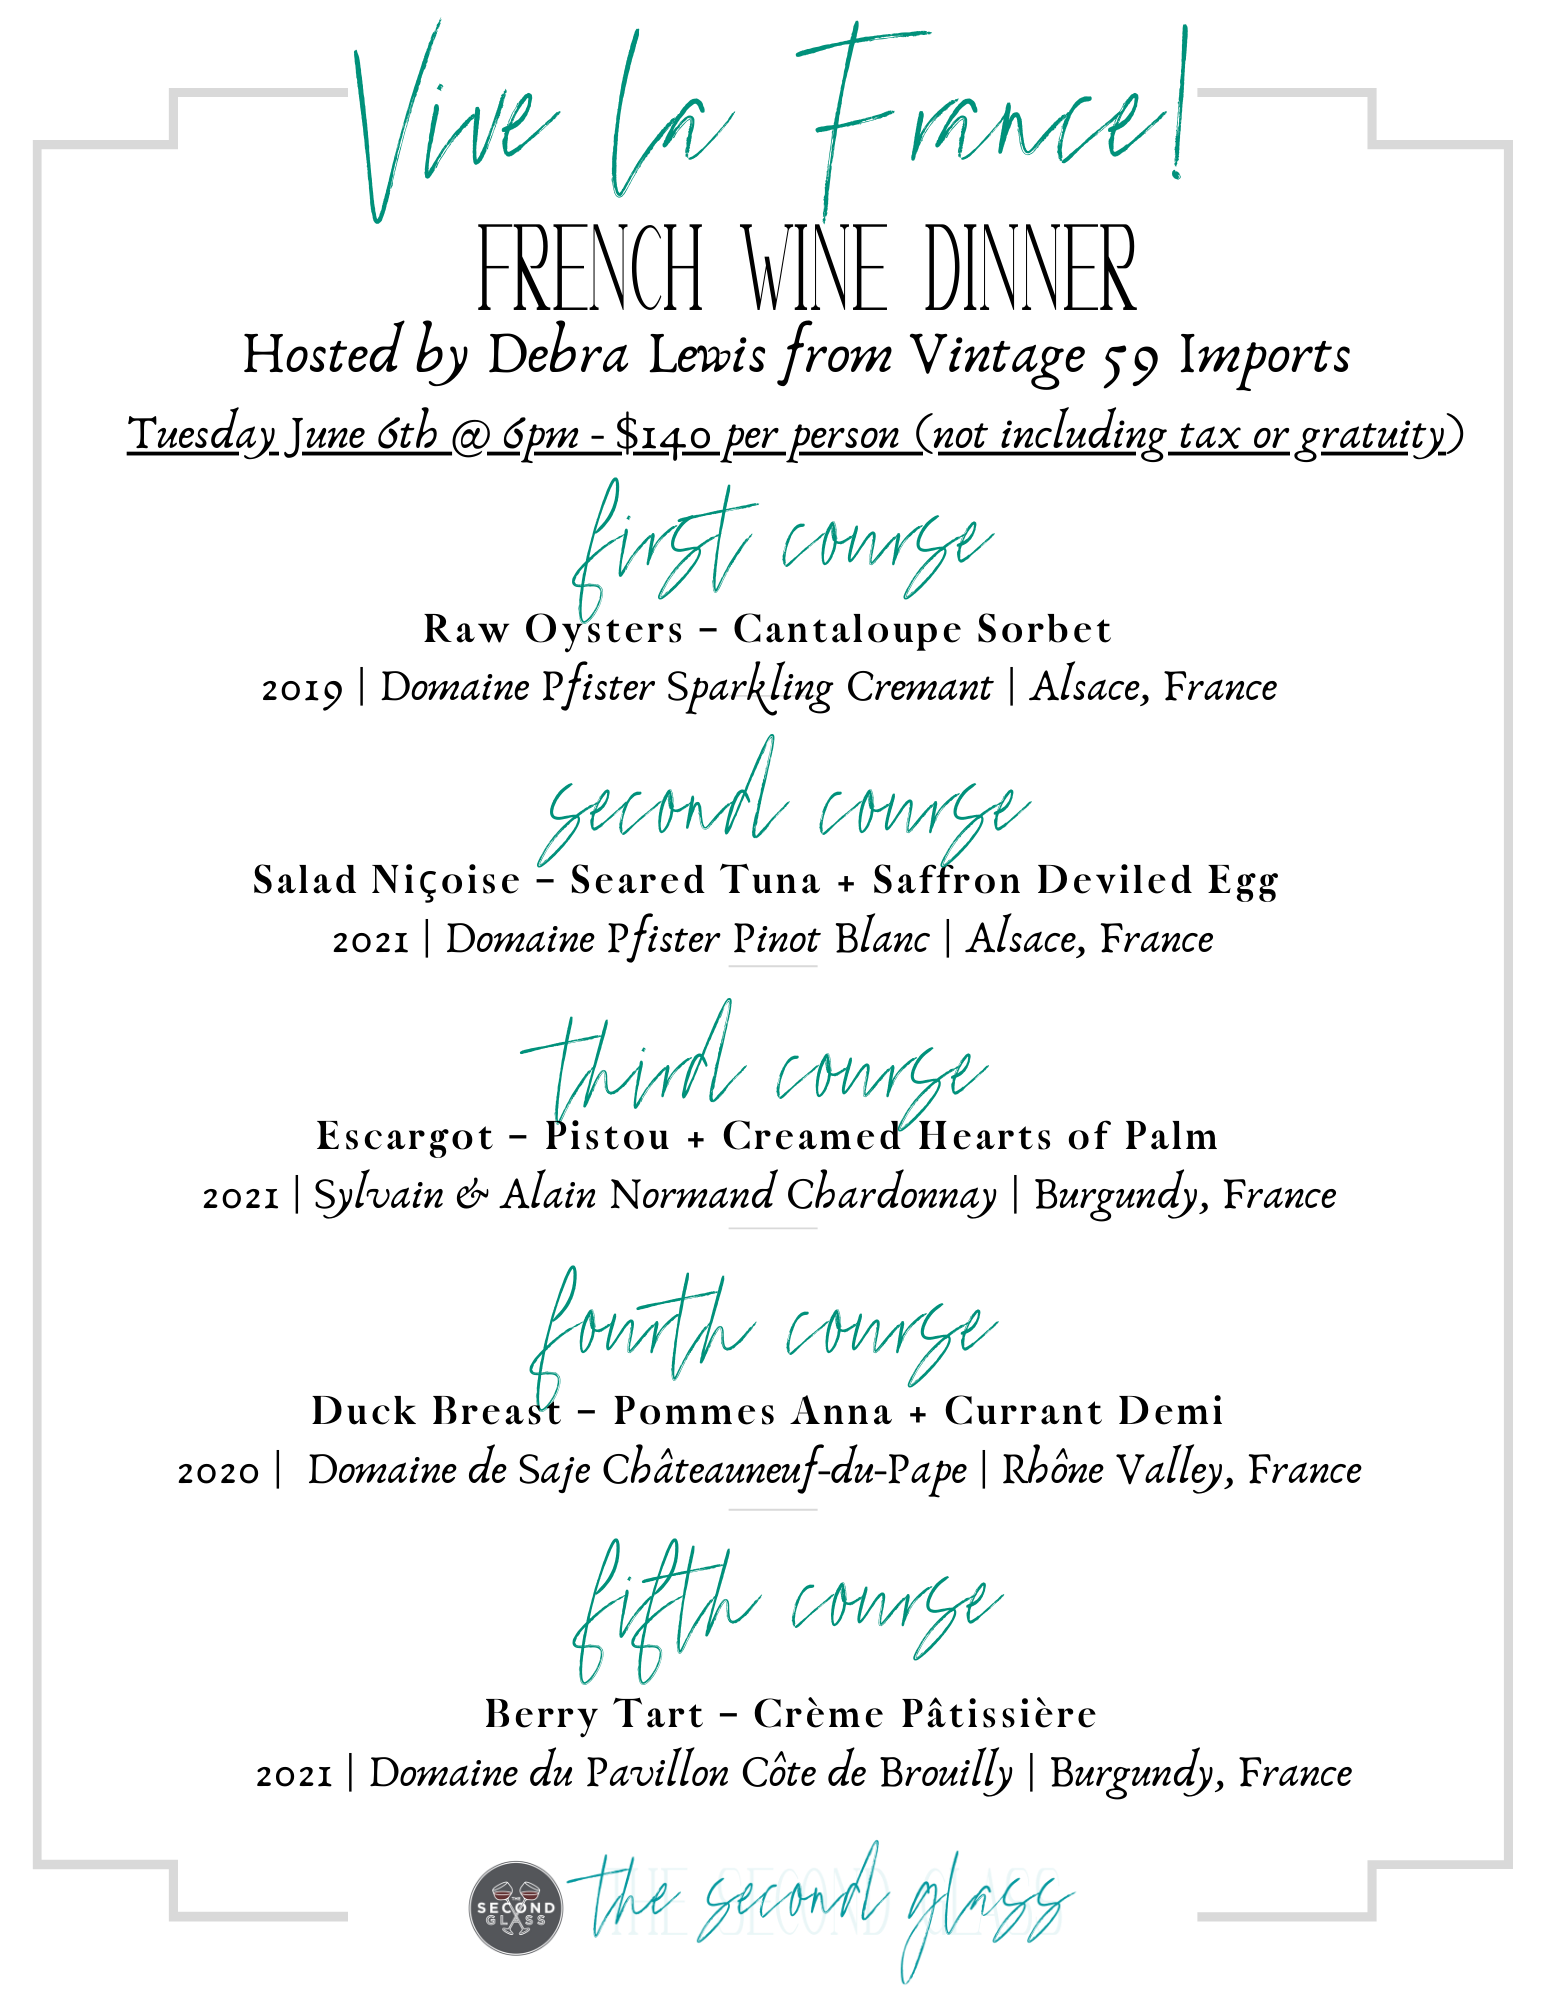 French Wine Dinner The Second Glass menu